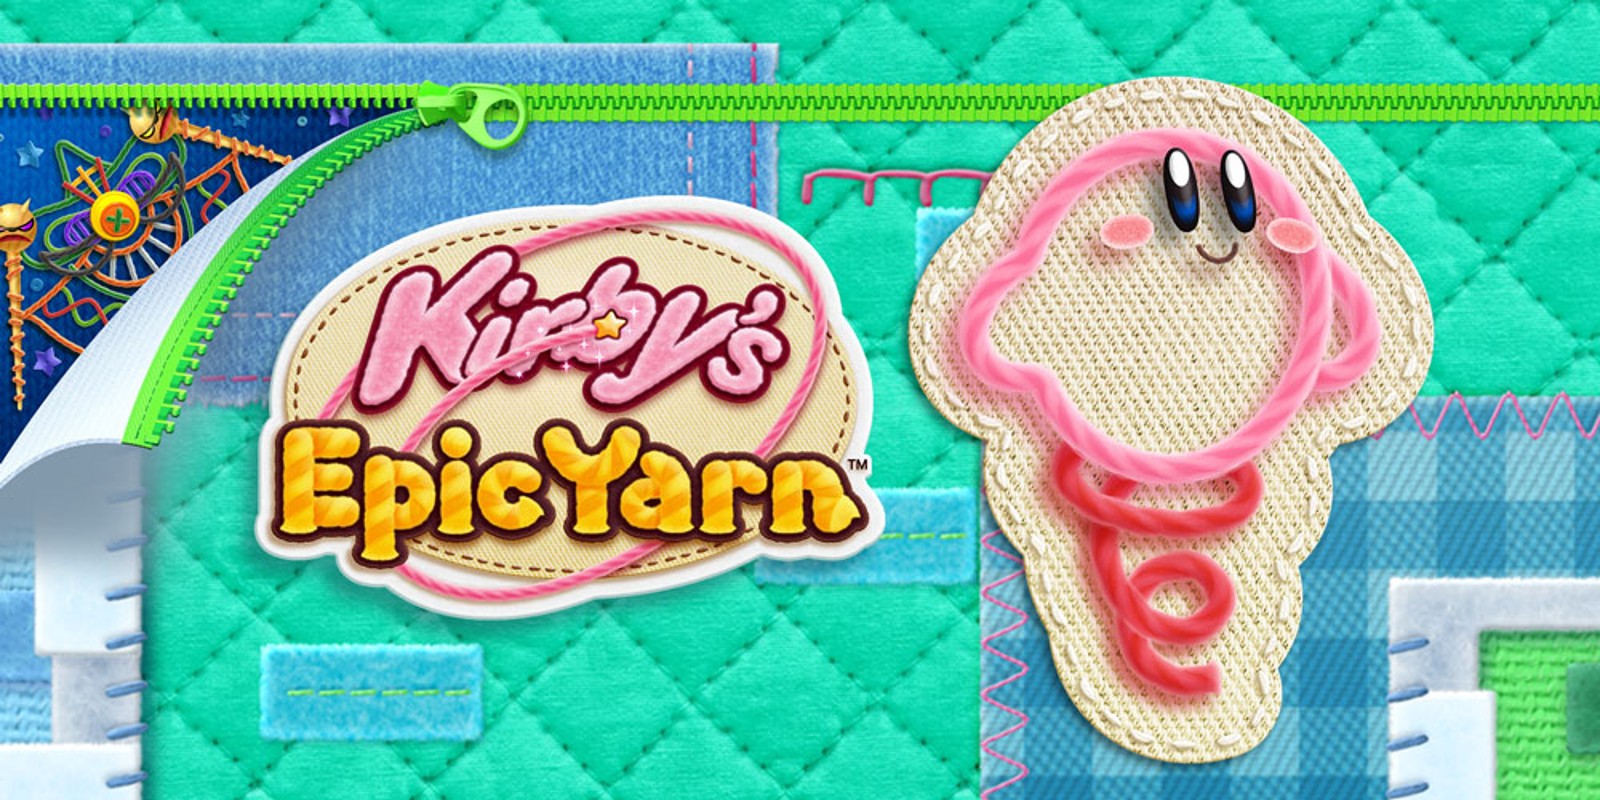 Image result for kirby's epic yarn